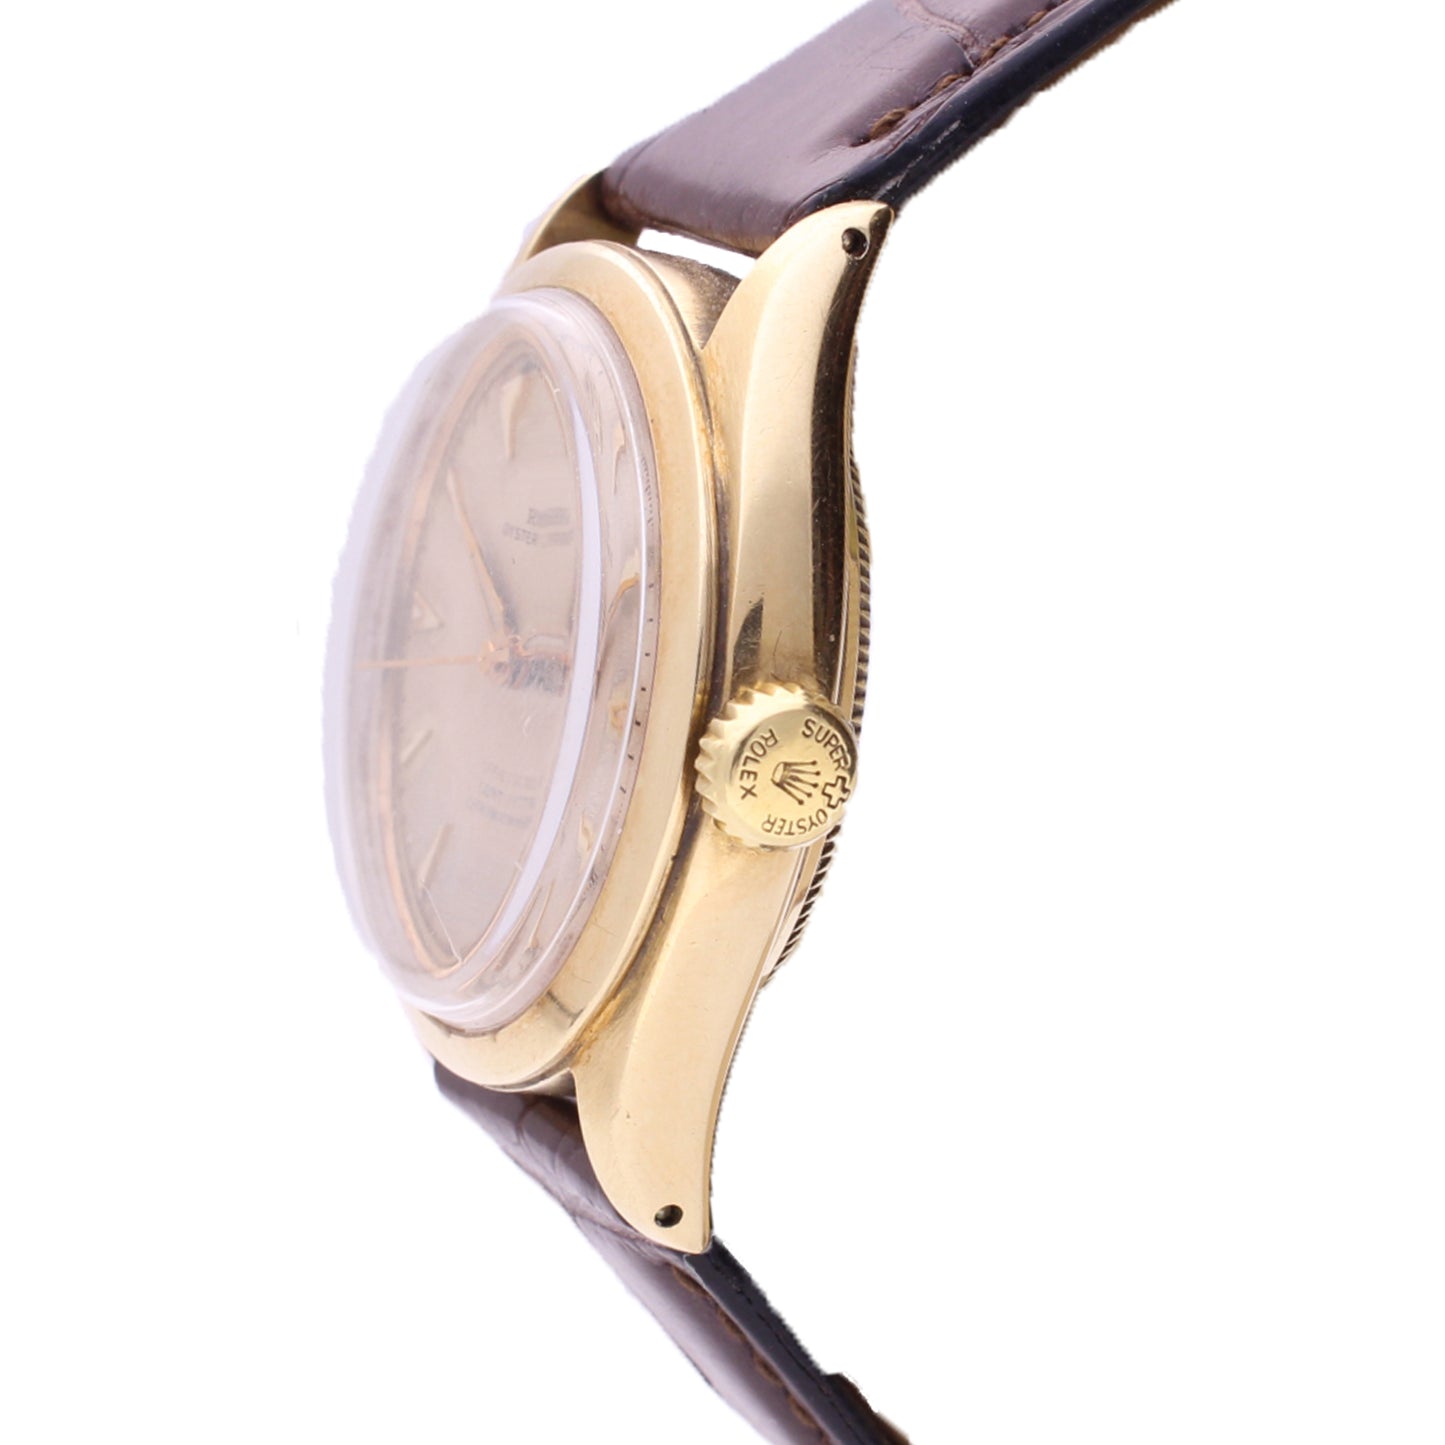 14ct yellow gold Rolex oyster perpetual 'Bubble back' wristwatch. Made 1960